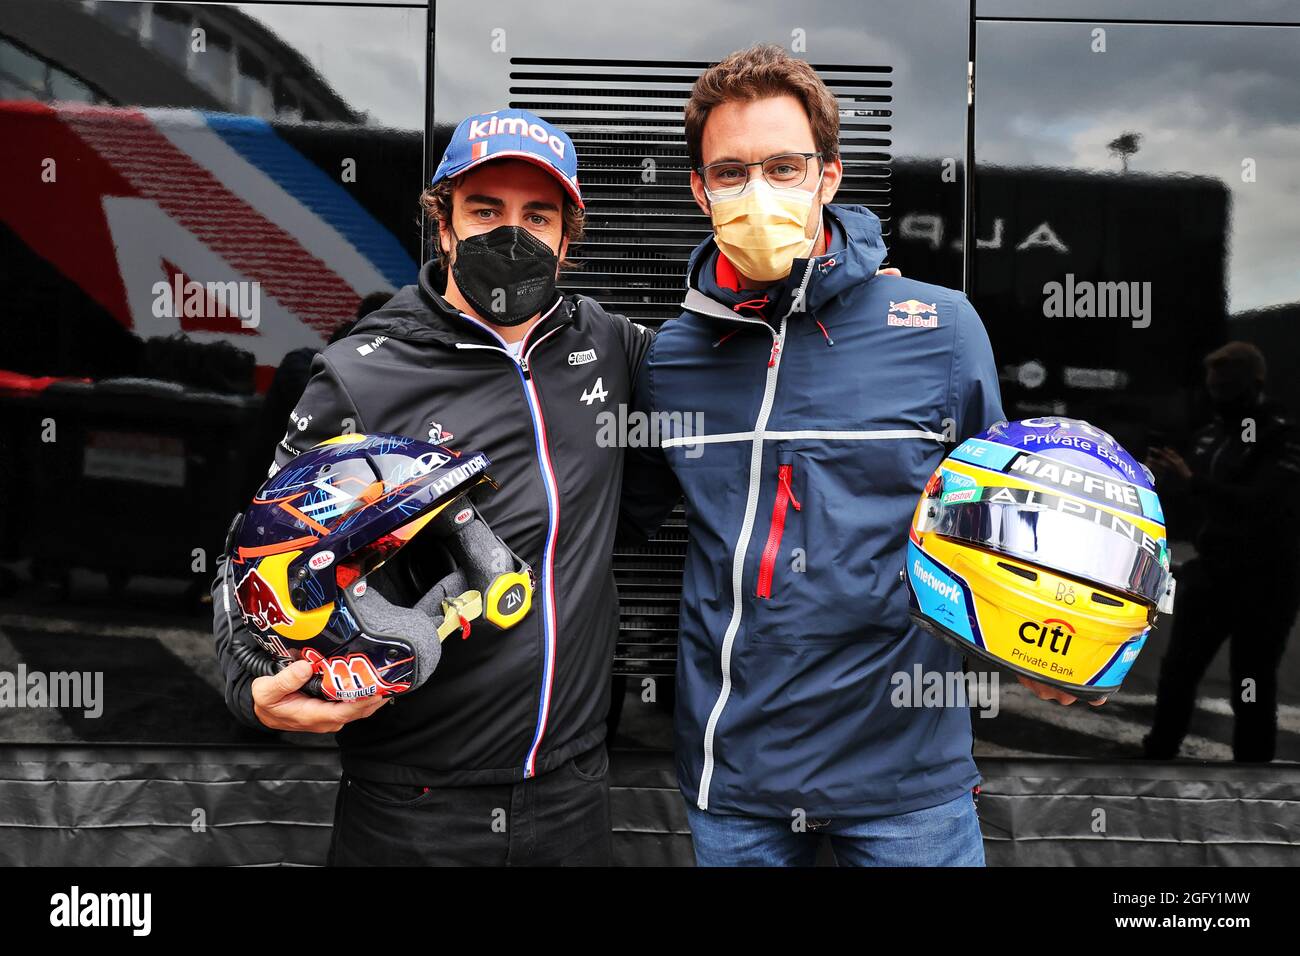 Spa-Francorchamps, Belgium. 27th Aug 2021, (L to R): Fernando Alonso (ESP) Alpine F1 Team swaps helmets with Thierry Neuville (BEL) WRC Rally Driver. Belgian Grand Prix, Friday 27th August 2021. Spa-Francorchamps, Belgium. Credit: James Moy/Alamy Live News Stock Photo